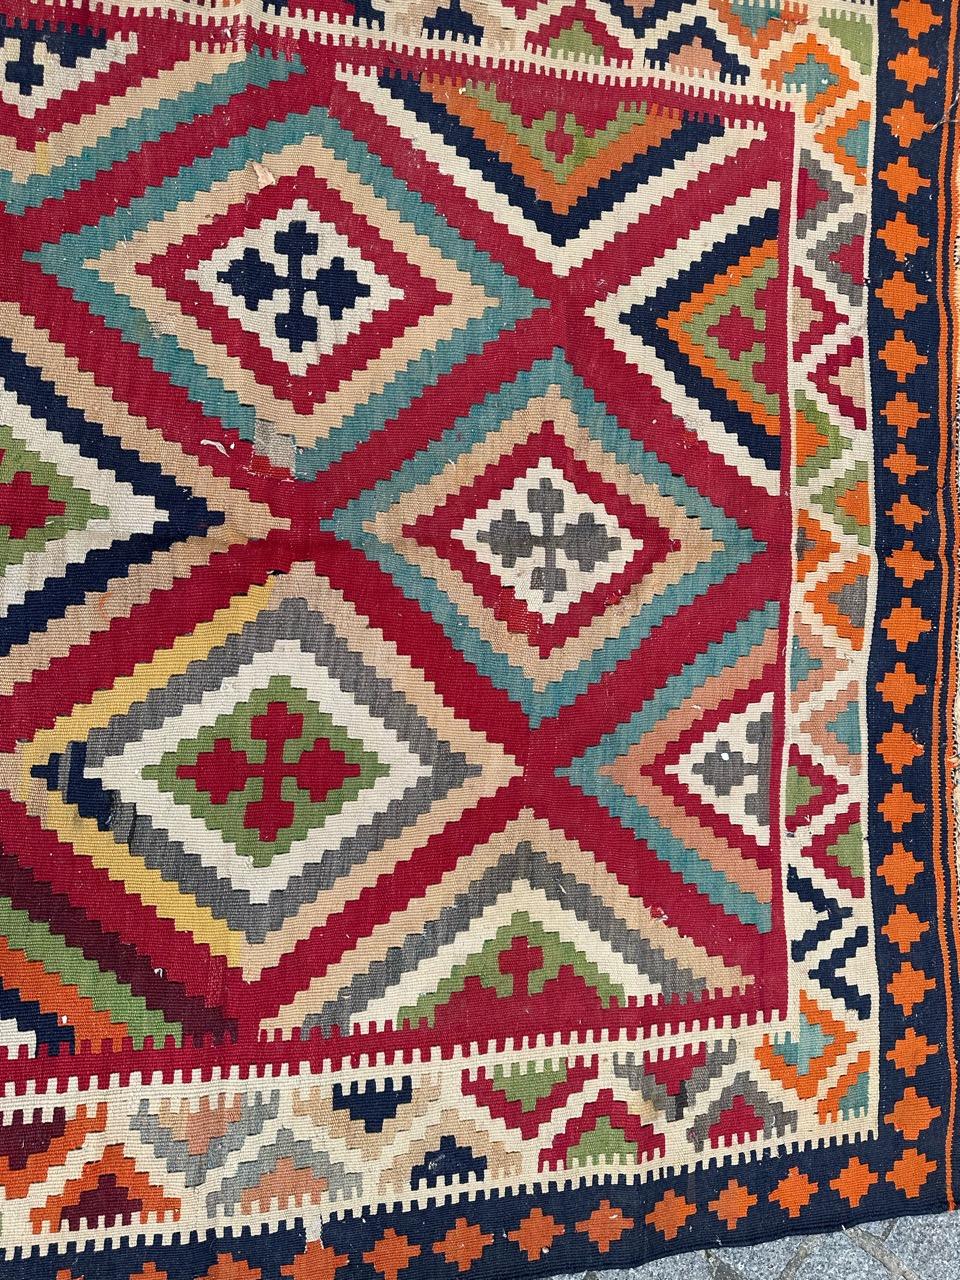 Exquisite Qashqai antique Kilim, meticulously handwoven with wool on a cotton foundation. Featuring a captivating geometric and tribal design, the vibrant red backdrop showcases interconnected diamonds adorned with stylish patterns in green, orange,